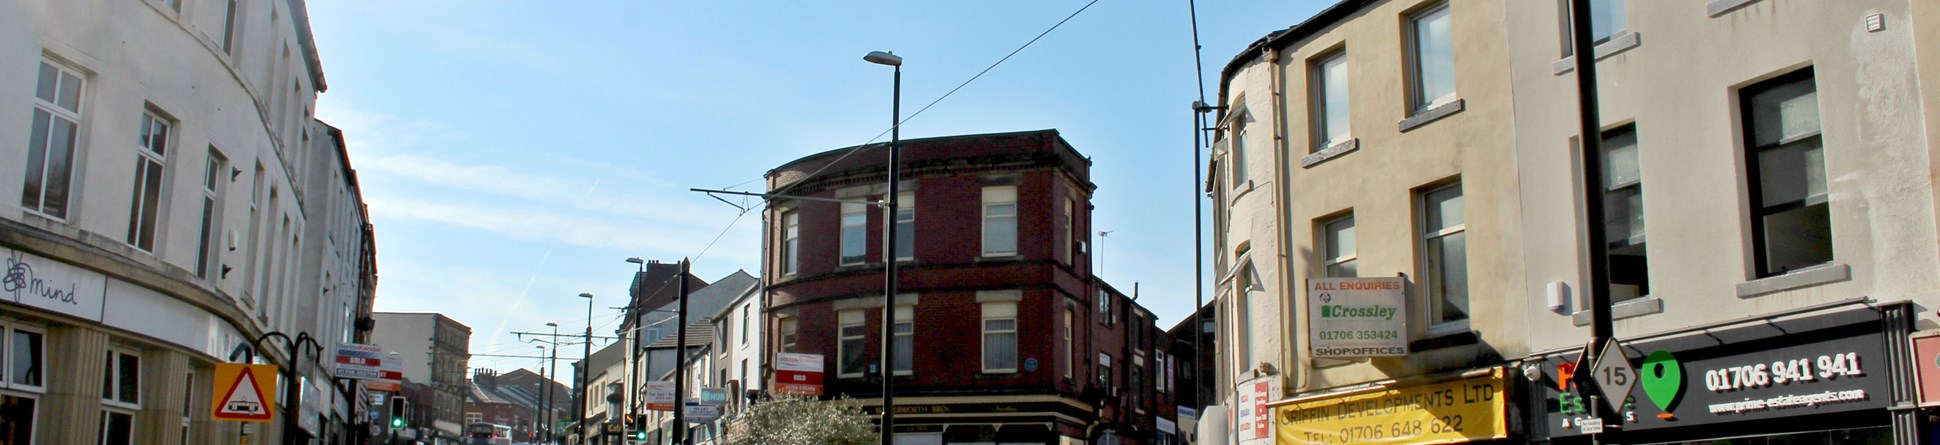 General view looking up Drake Street, Rochdale on a sunny day in 2018.